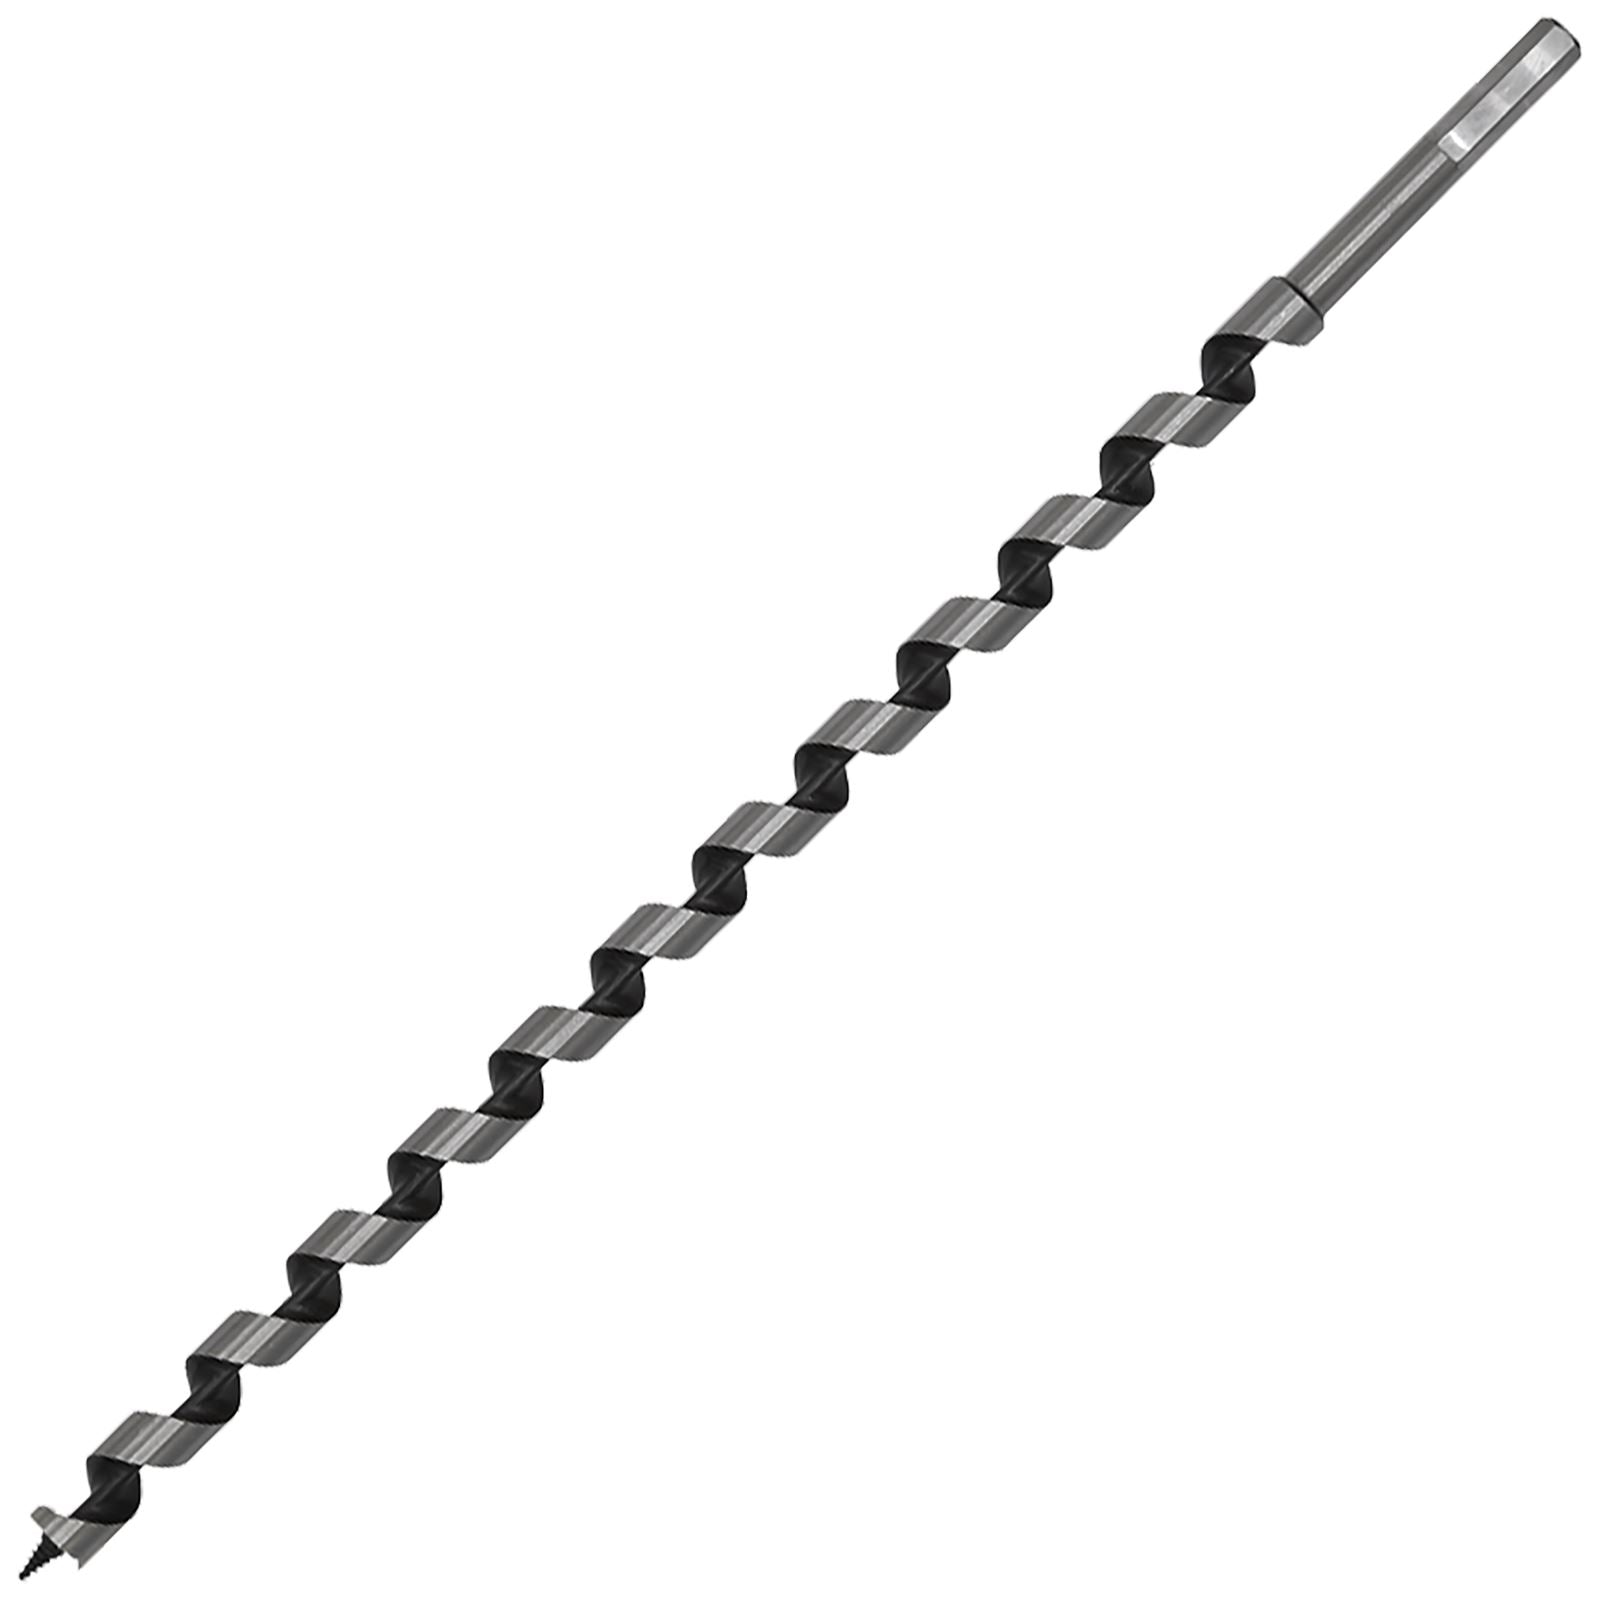 Worksafe by Sealey Auger Wood Drill Bit 16mm x 460mm